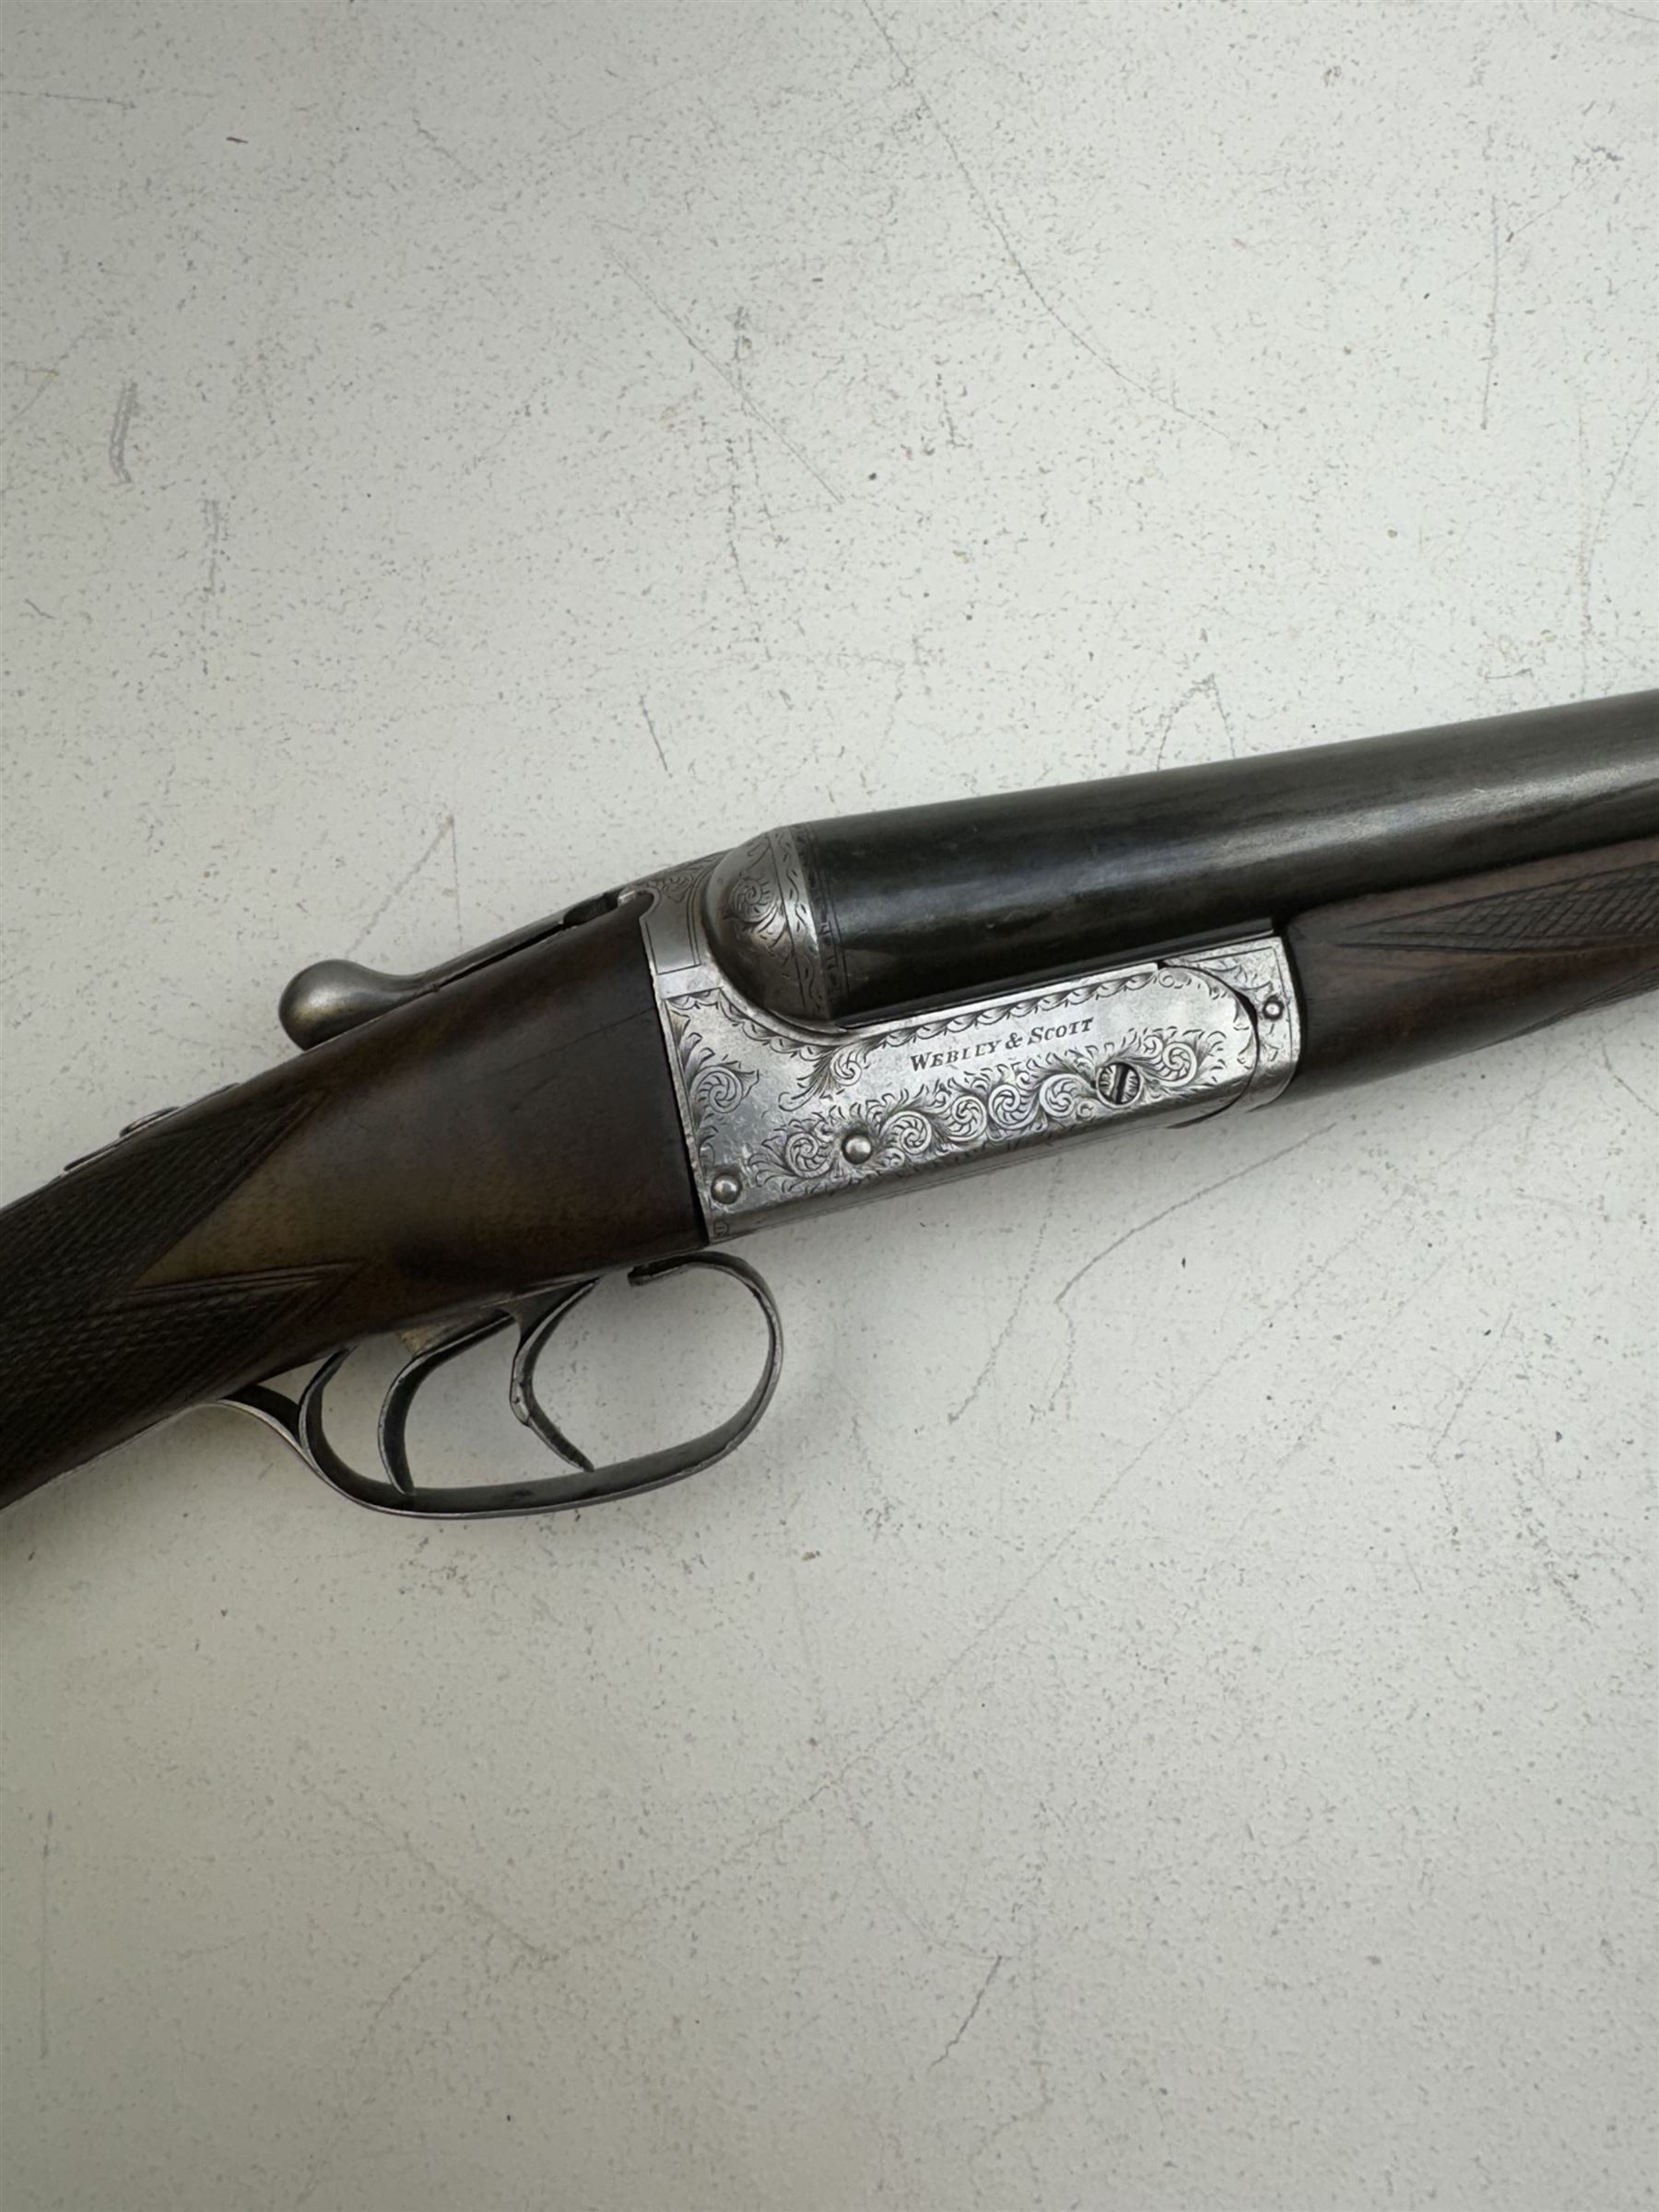 SHOTGUN CERTIFICATE REQUIRED - Webley & Scott Birmingham double trigger boxlock ejector side-by-side - Image 3 of 12